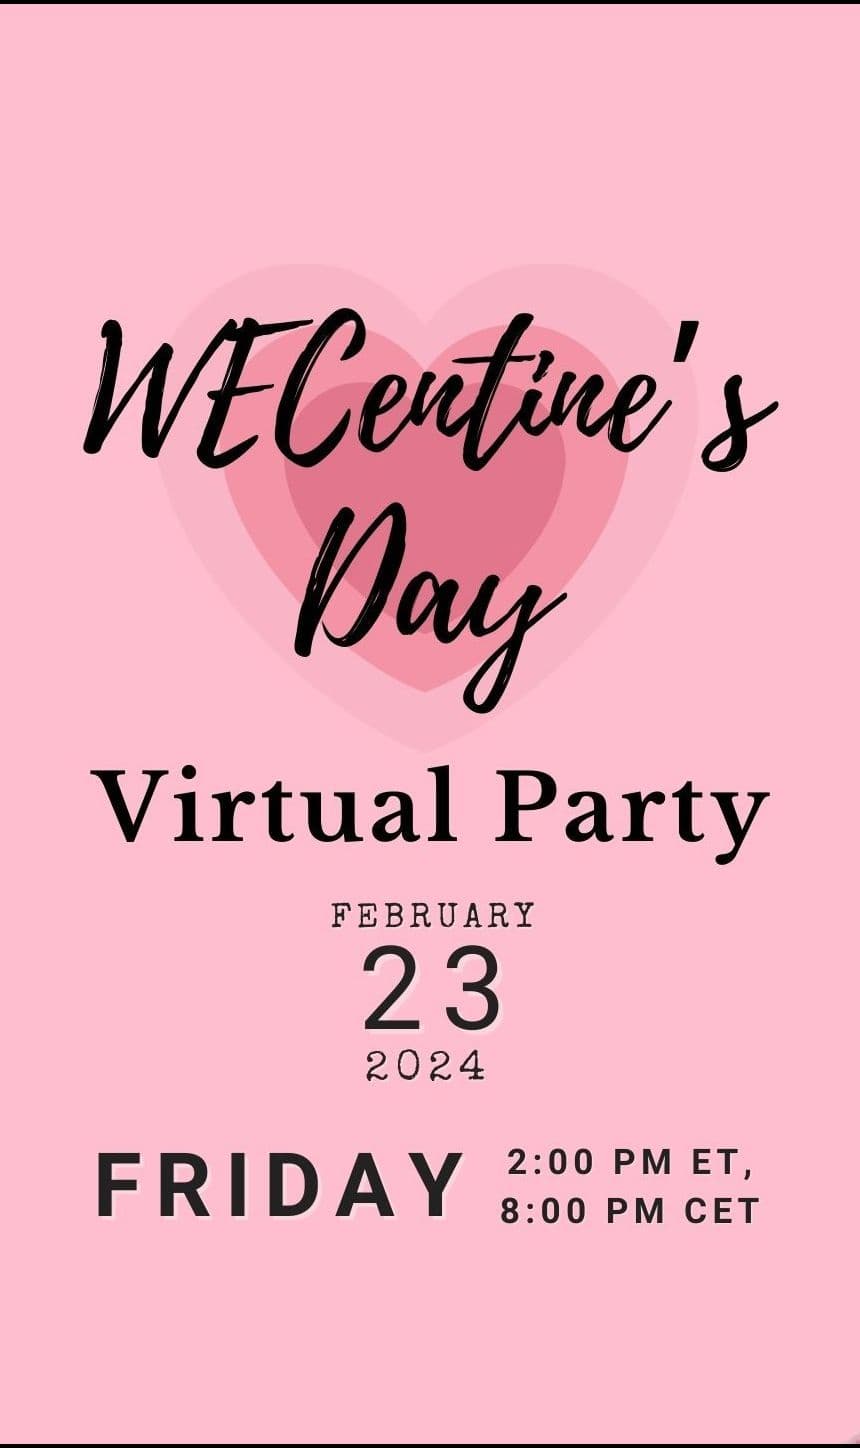 WEC global valentines day party.jpg